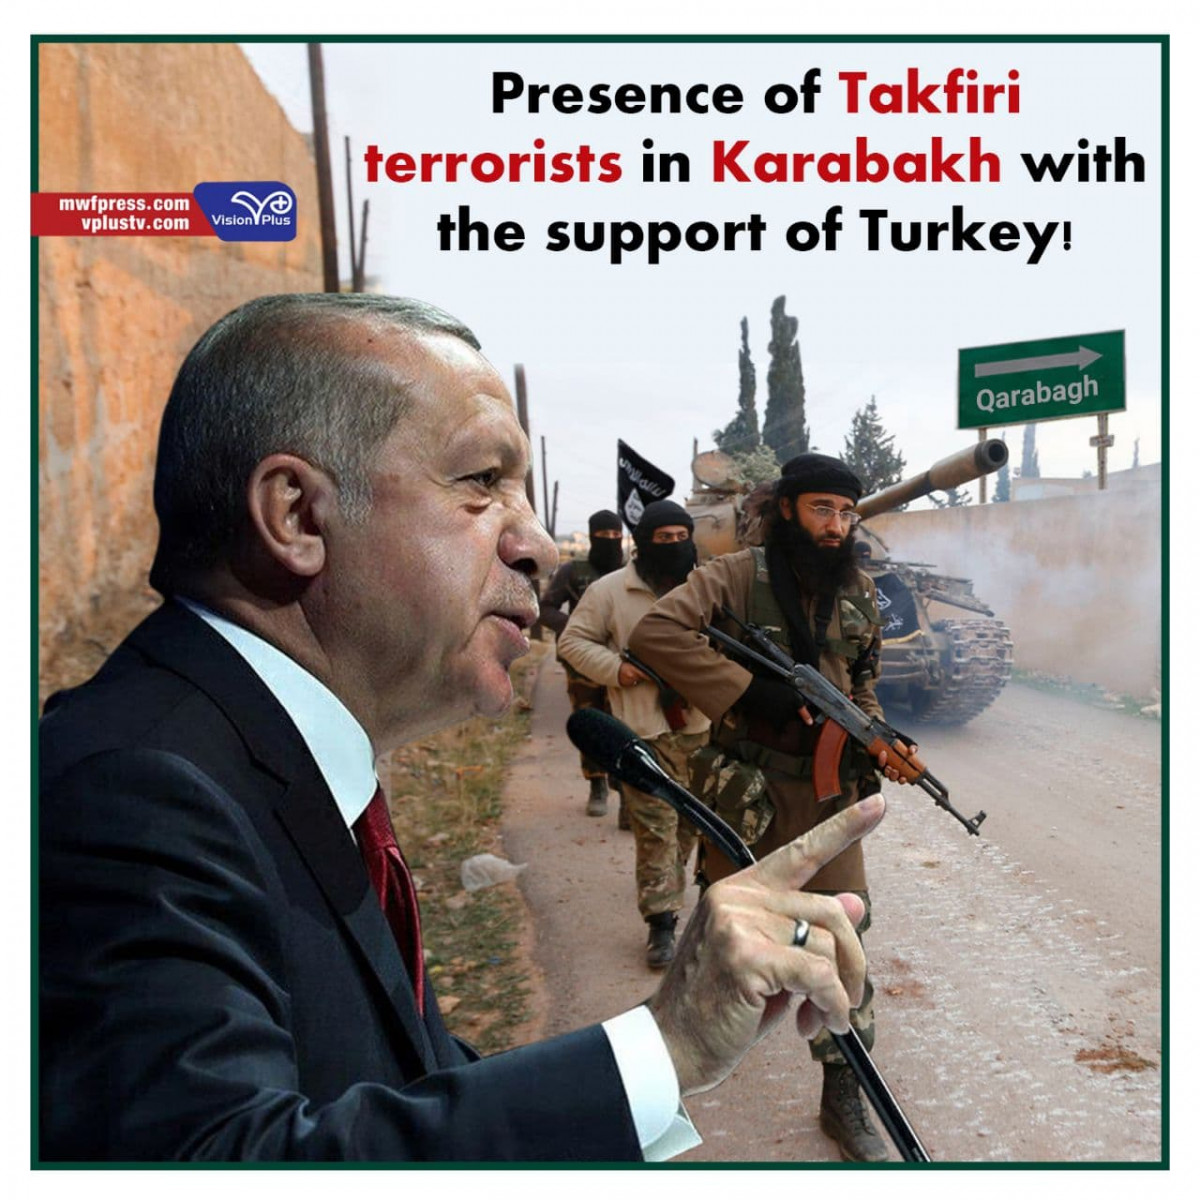 Presence of Takfiri terrorists in Karabakh with the support of Turkey